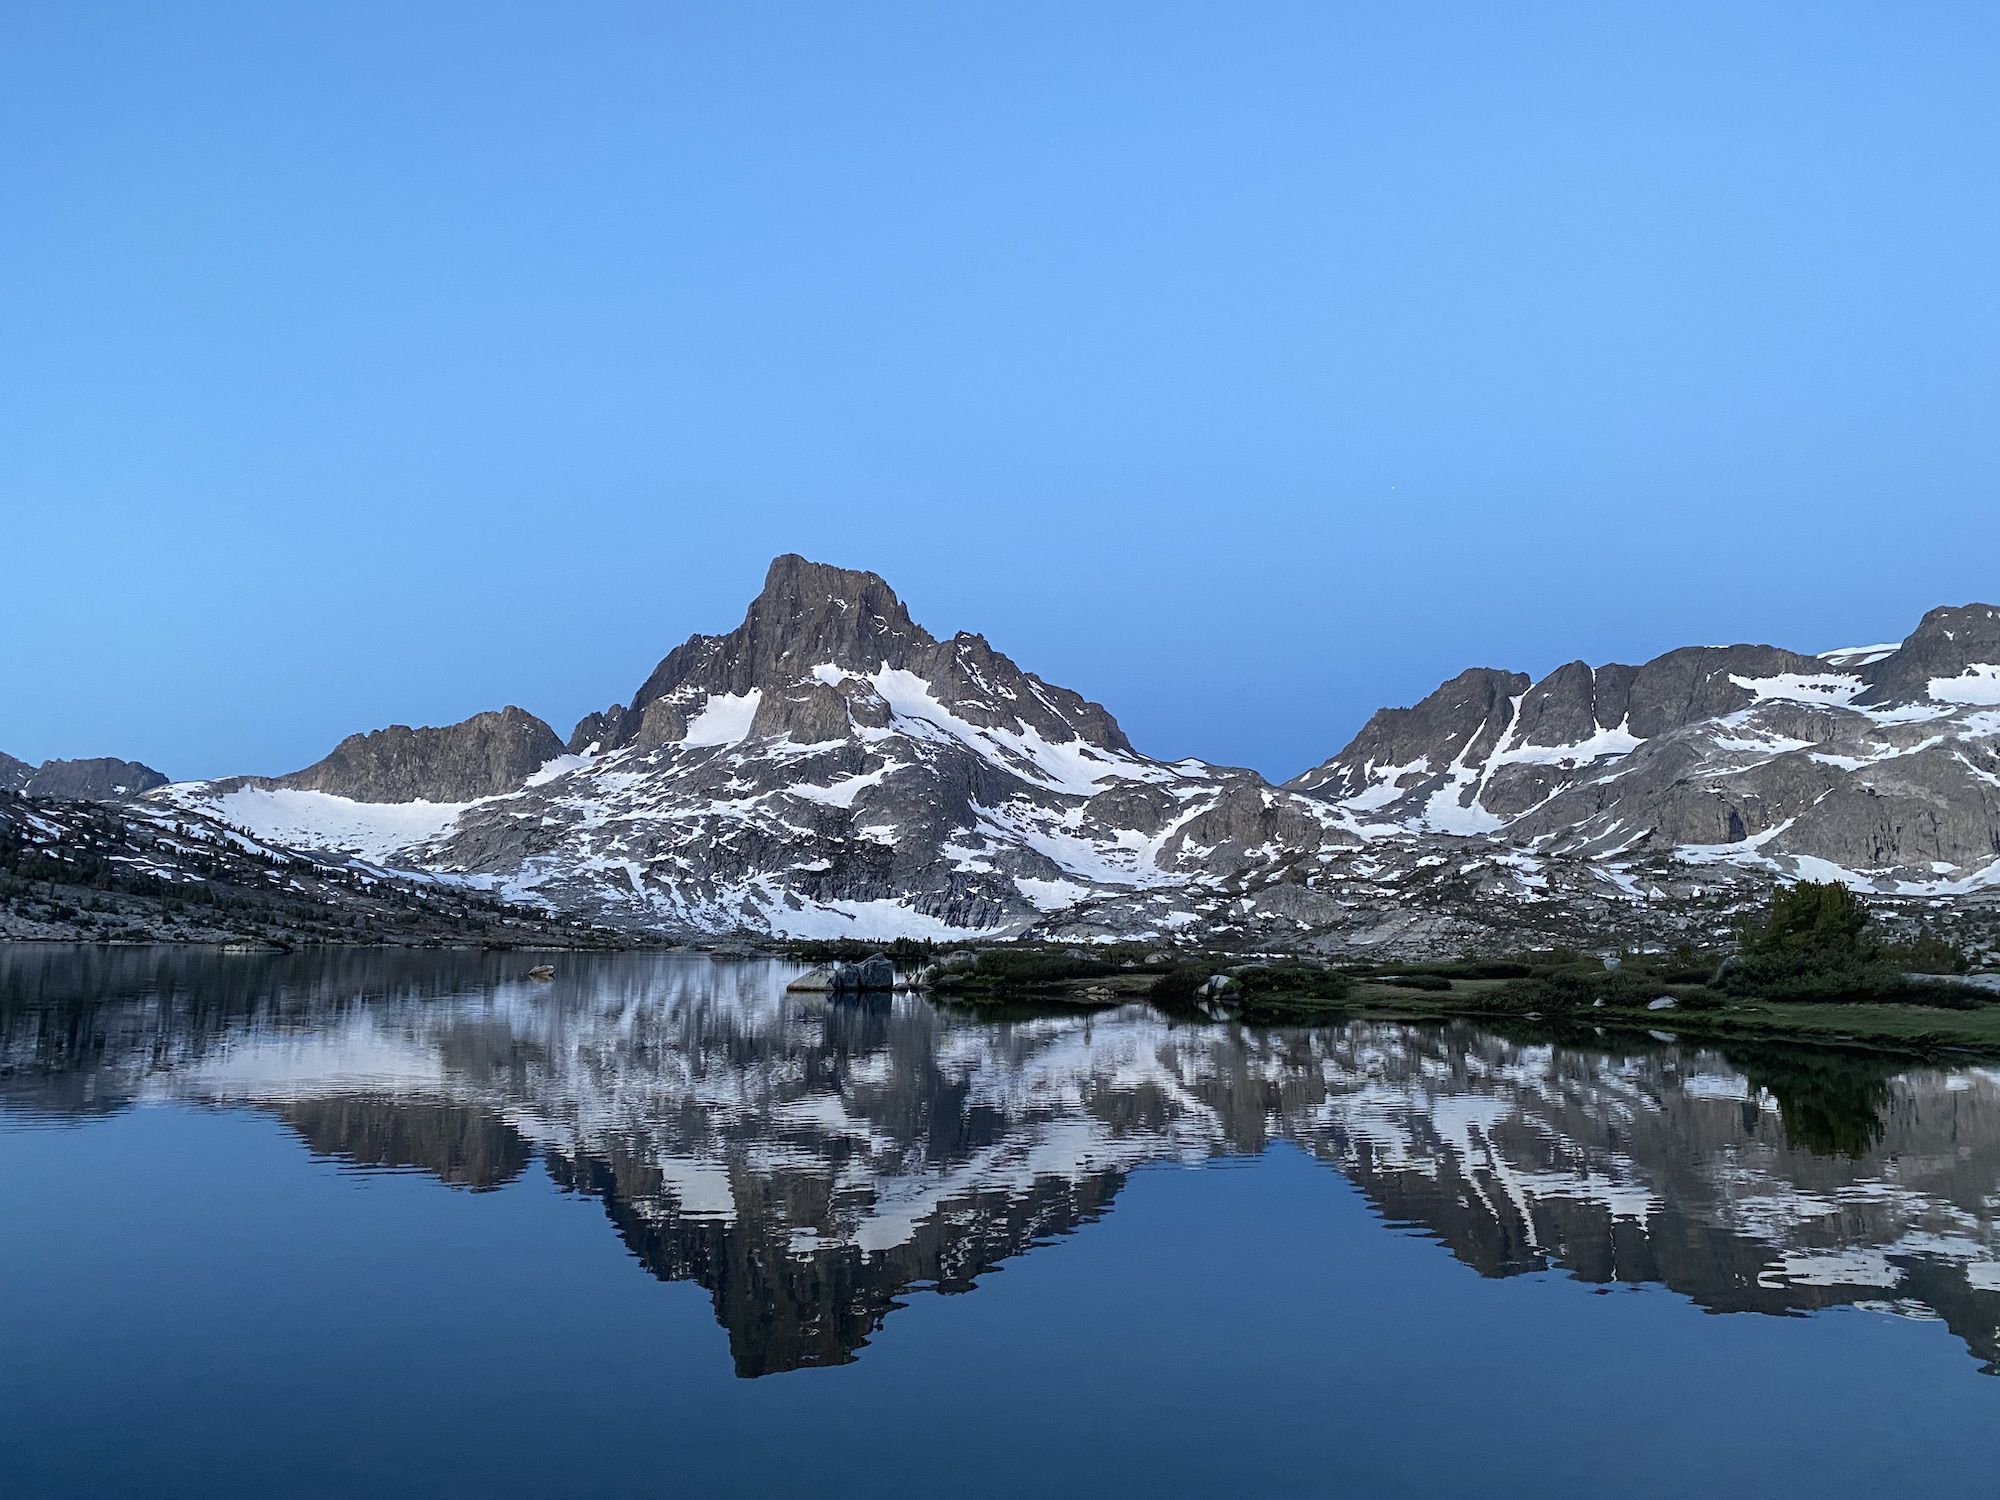 A reflection of a mountain in a calm lake